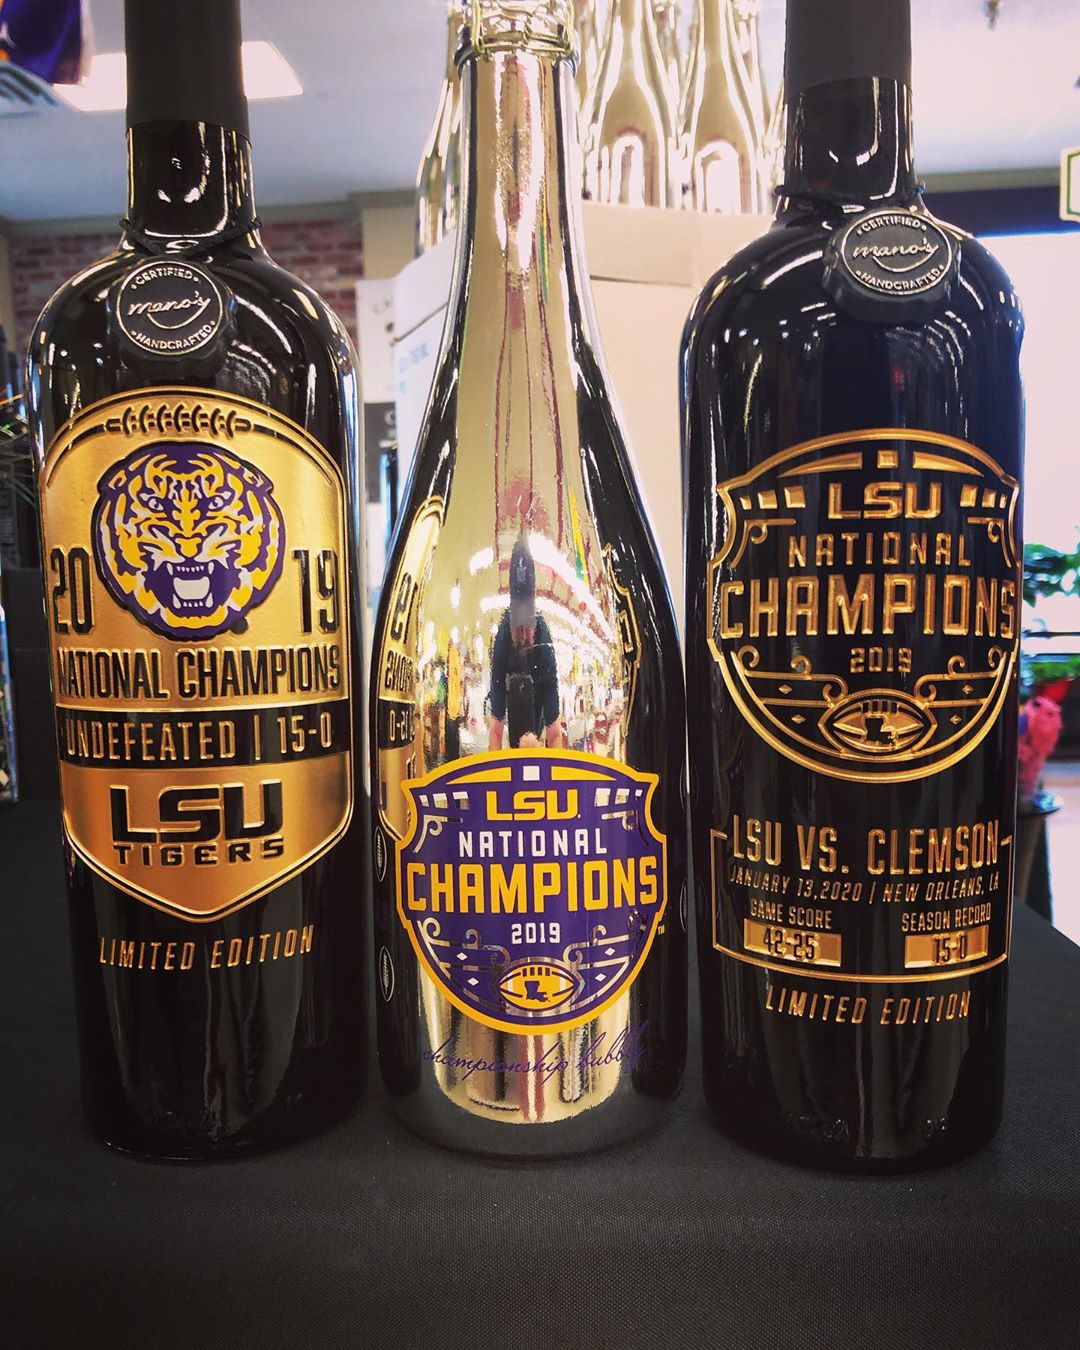 We have received the 2019 National Championship commemorative wines at our a Perkins Rd location!…